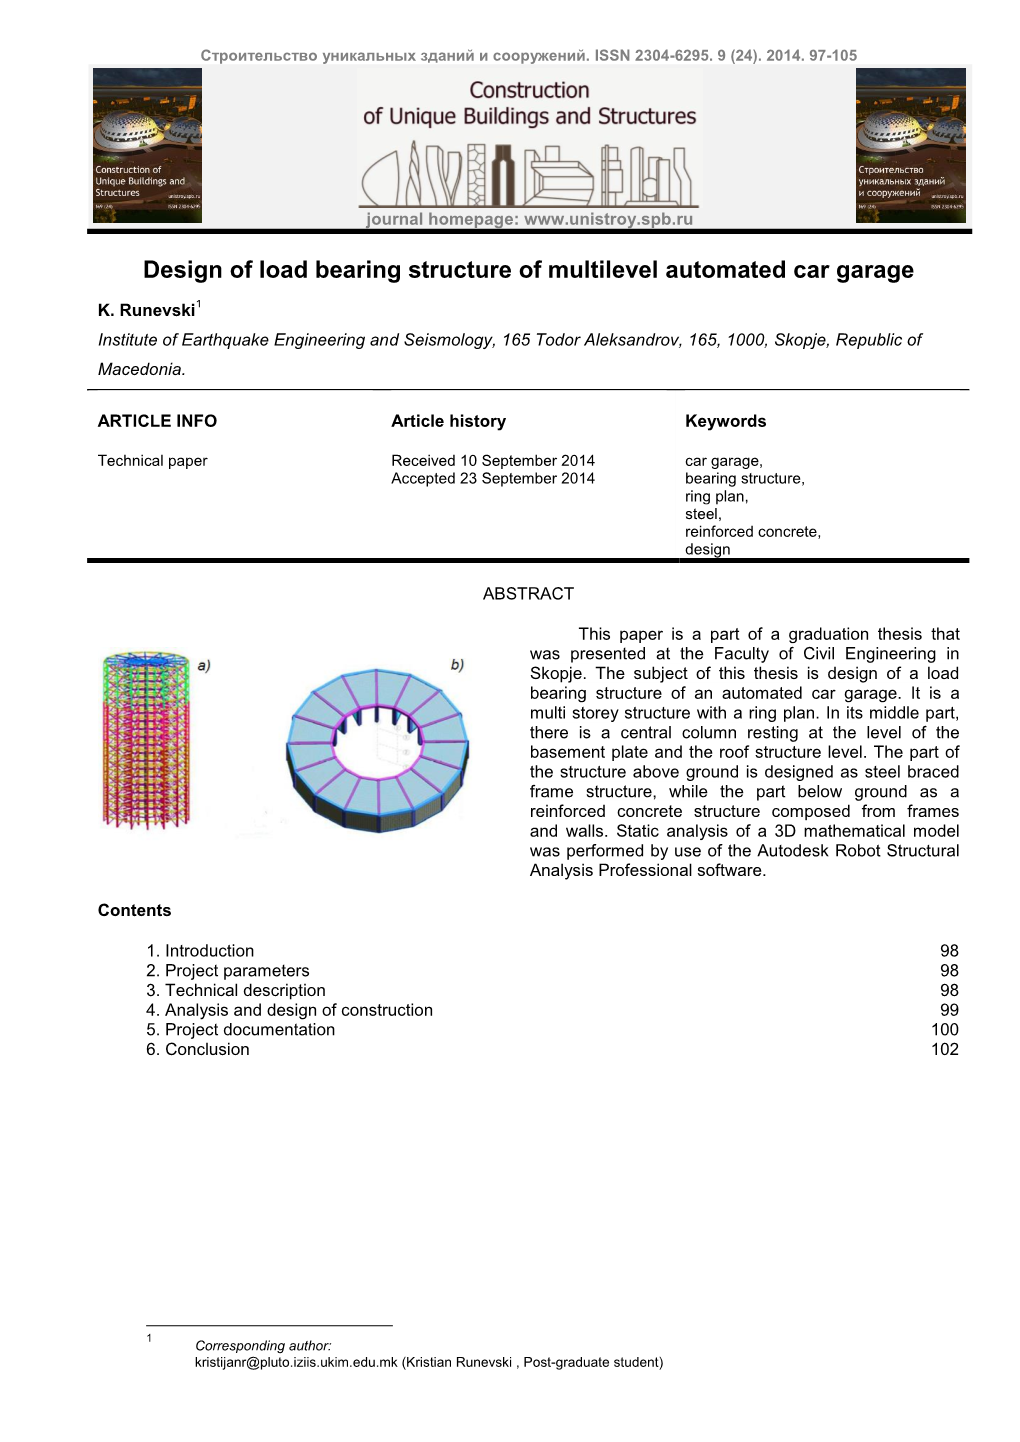 Design of Load Bearing Structure of Multilevel Automated Car Garage